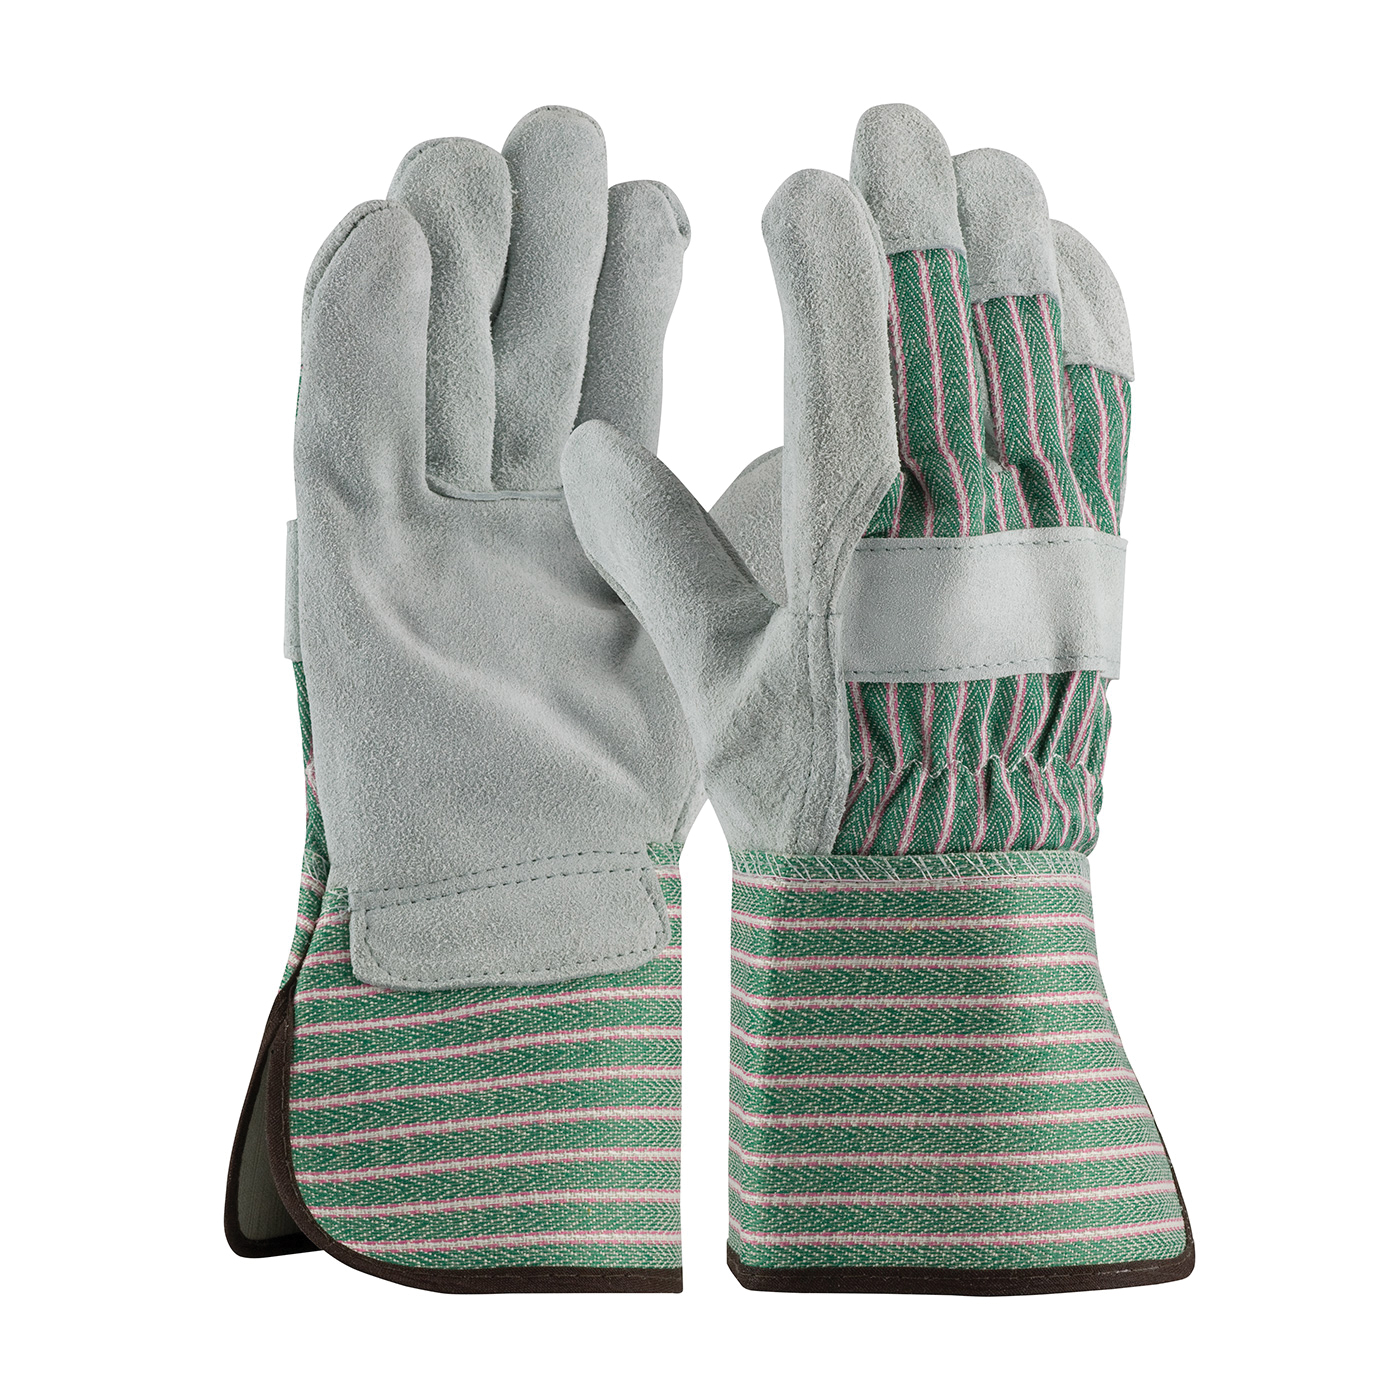 PIP® 83-6663/S Bronze 83-6663 B-Grade General Purpose Gloves, Leather Palm, Gunn Cut with Wing Thumb Style, S, Shoulder Split Cowhide Leather Palm, 75% Cowhide Leather/25% Cotton, Green/Gray/Pink, Gauntlet/Rubberized Cuff, Uncoated Coating, Cotton Lining